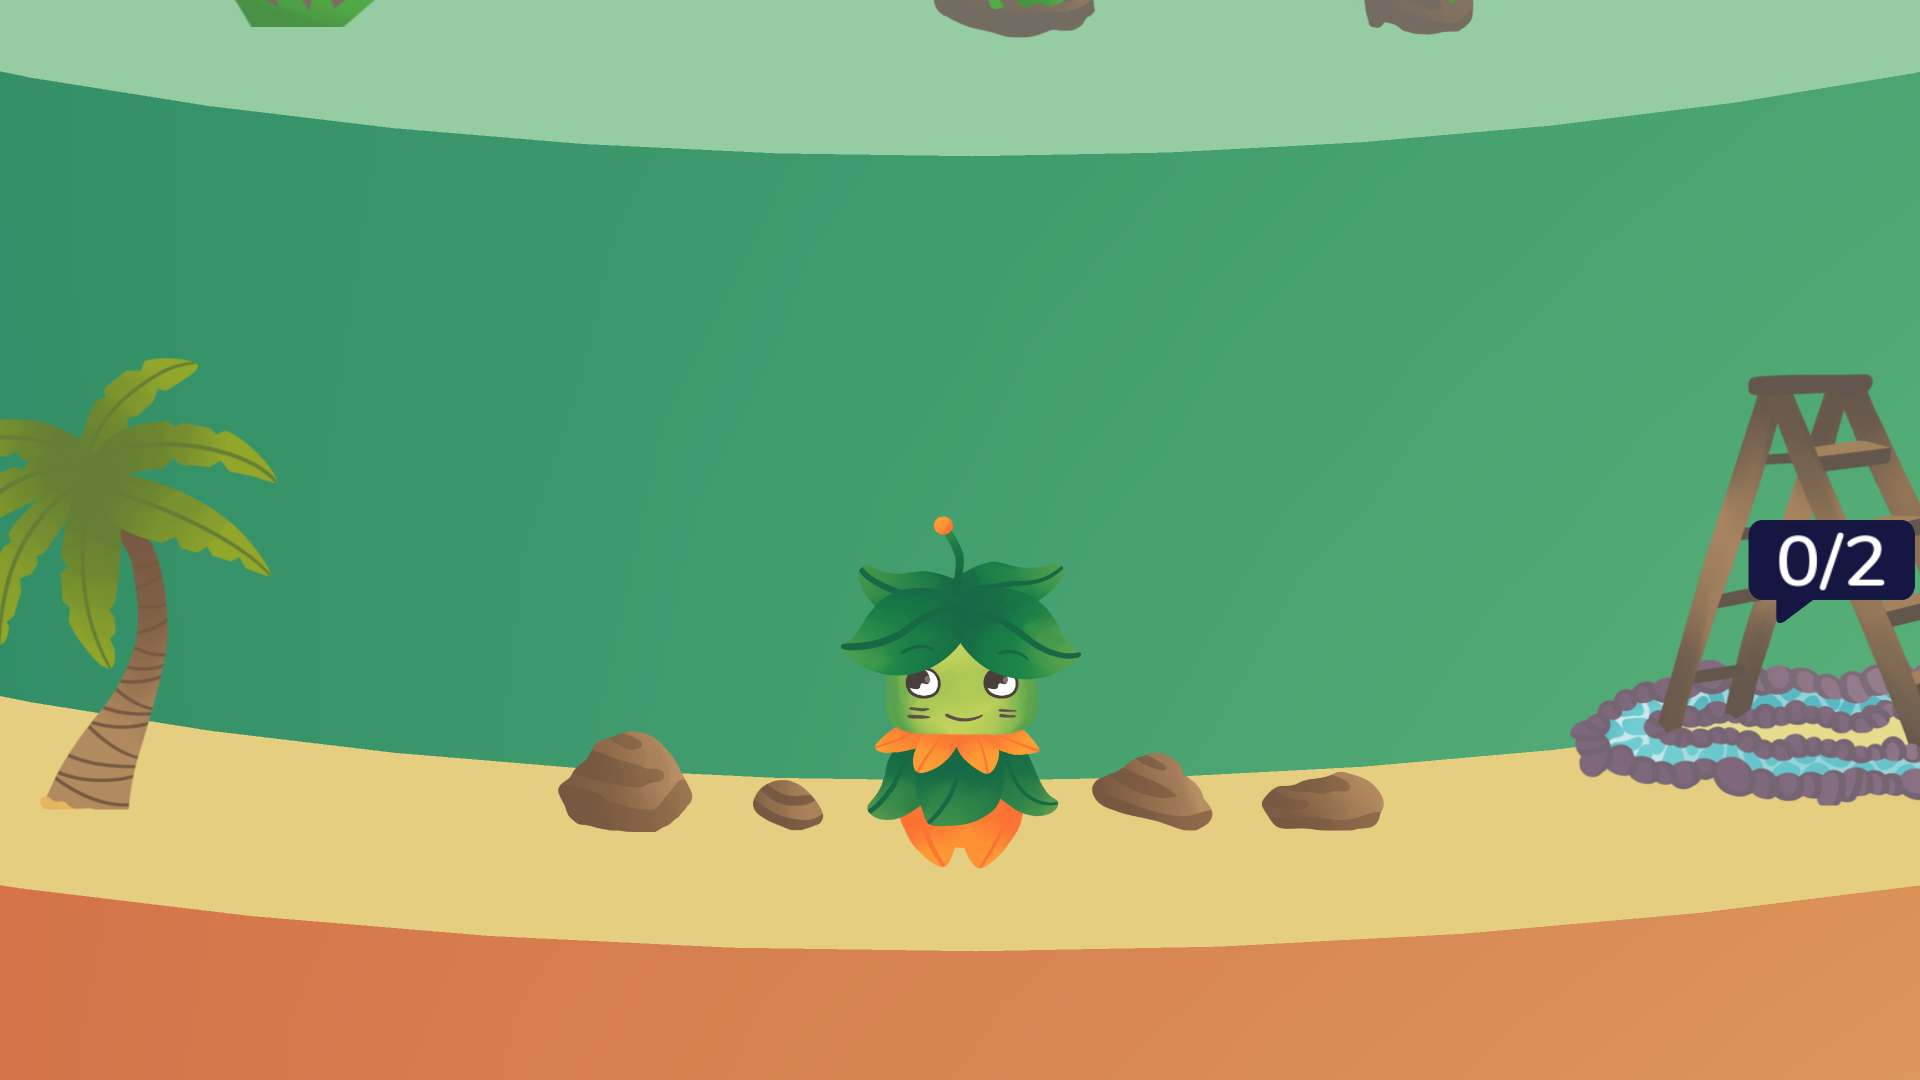 Screenshot of the game SumMit. In the center of the screen is a green and orange character, its hair and dress are made of leaves. It stands on the plateau of a multilevel cylindrical mountain. At its left is a palm tree. At its right a ladder can be seen, on top of it a counter that says '0 of 2'.